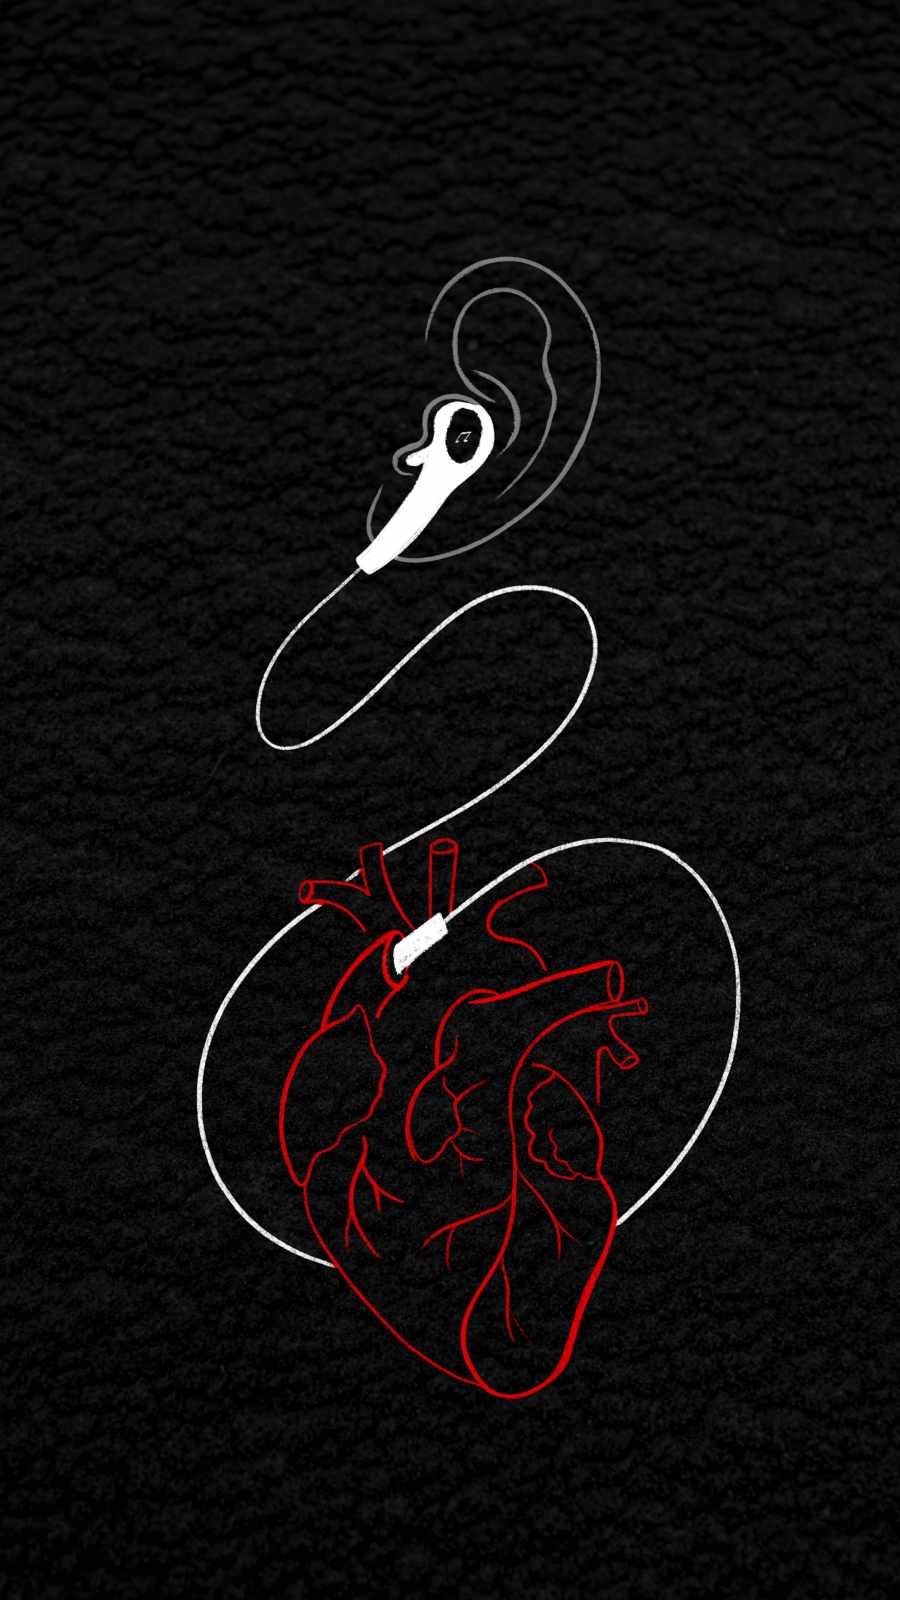 Music To Heart IPhone Wallpaper - IPhone Wallpapers : iPhone Wallpapers